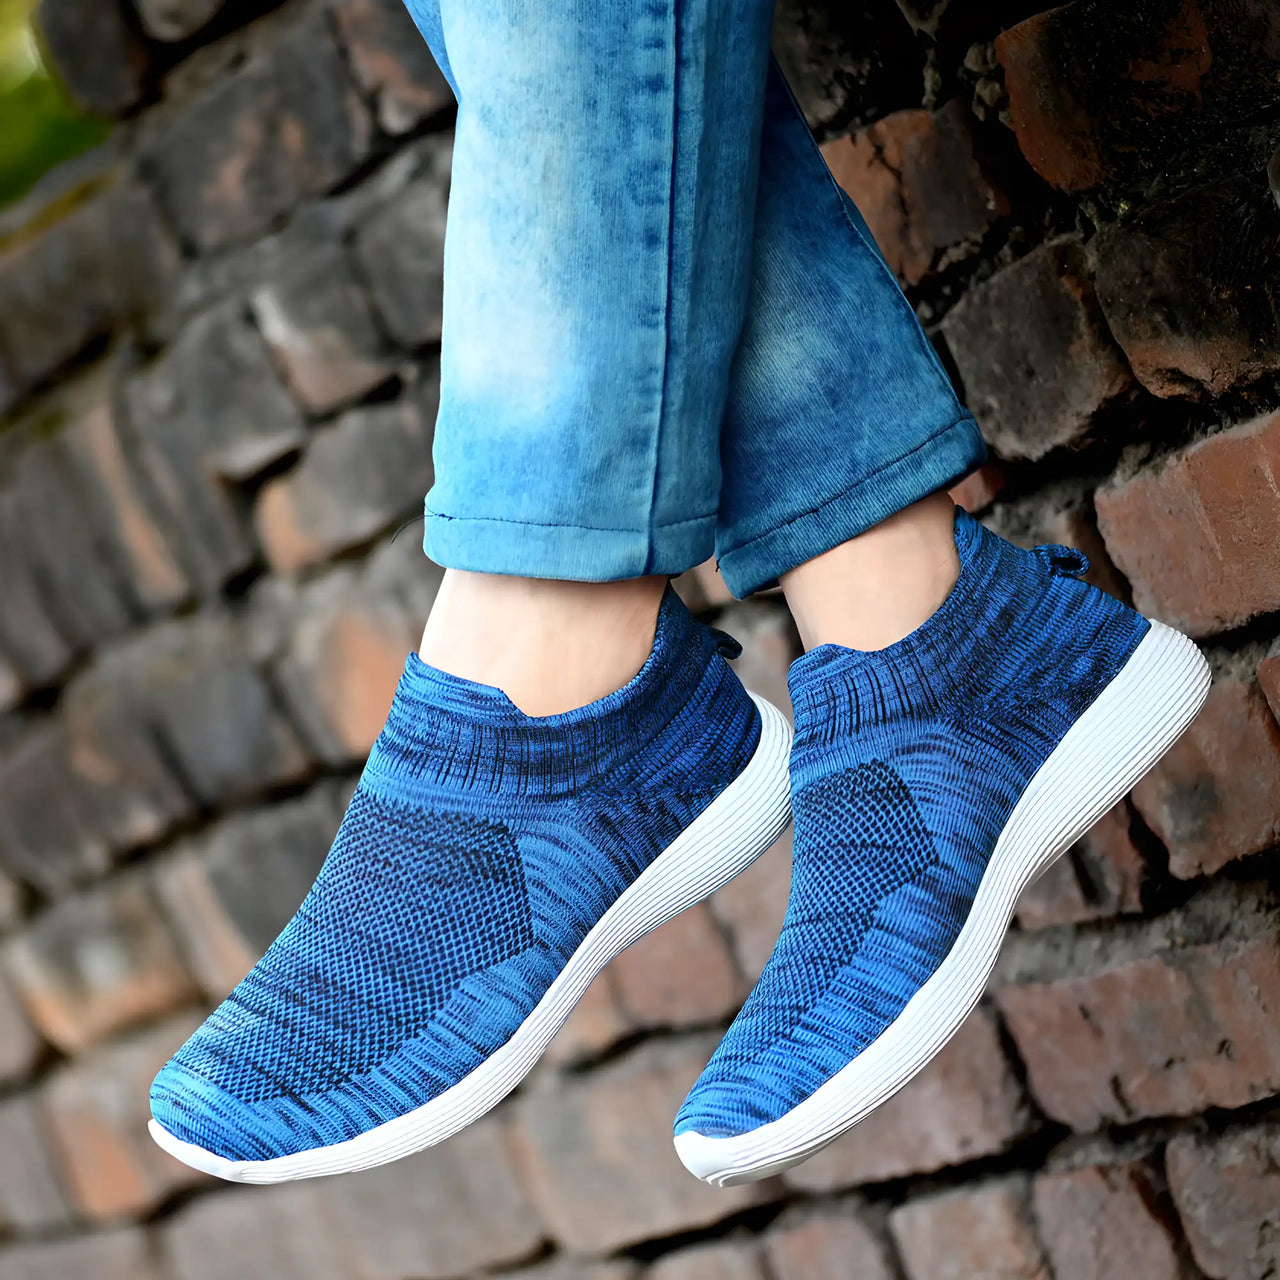 Shoe Island Knitted Party Wear Slip On Casual Socks Sports Shoes